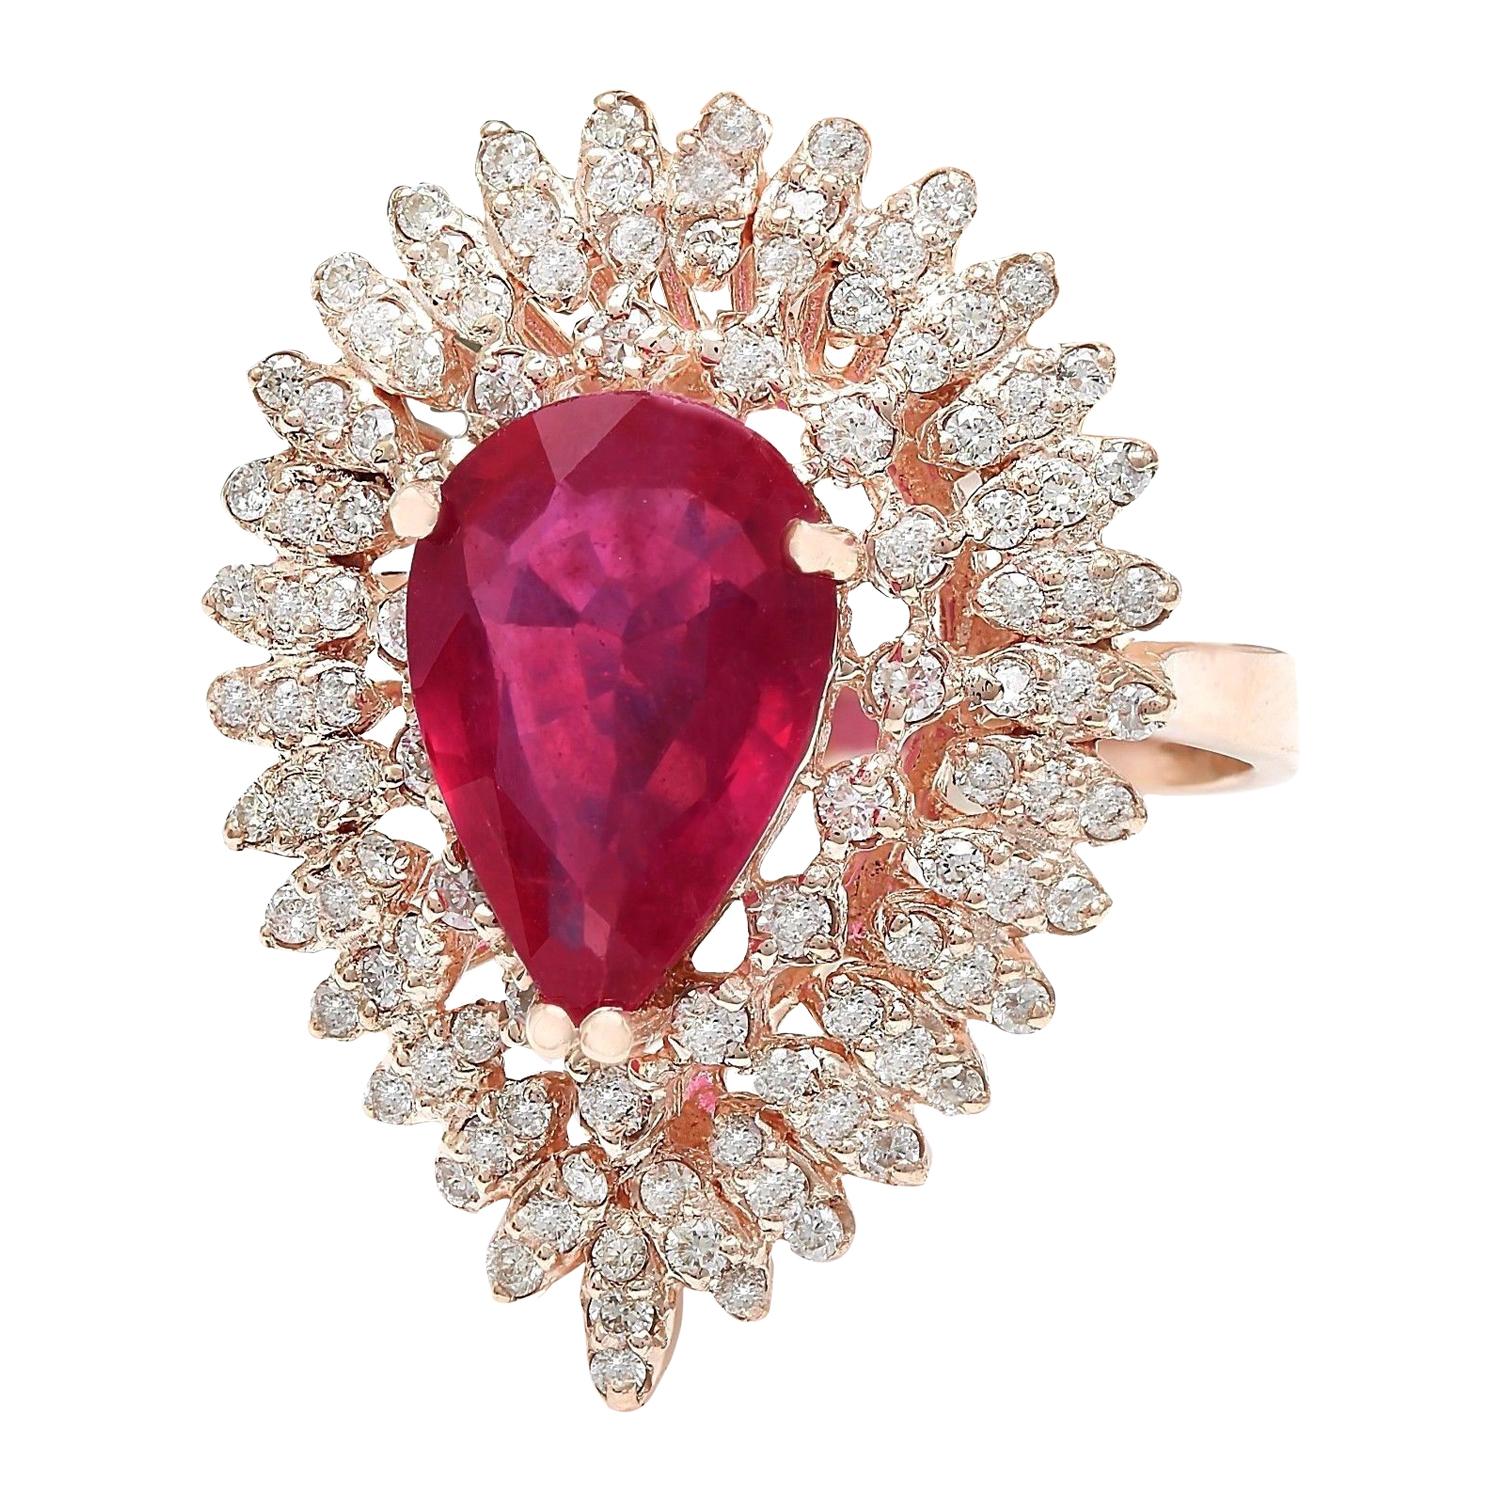 4.78 Carat Natural Ruby 14K Solid Rose Gold Diamond Ring
 Item Type: Ring
 Item Style: Cocktail
 Material: 14K Rose Gold
 Mainstone: Ruby
 Stone Color: Red
 Stone Weight: 3.53 Carat
 Stone Shape: Pear
 Stone Quantity: 1
 Stone Dimensions: 13.00x9.00